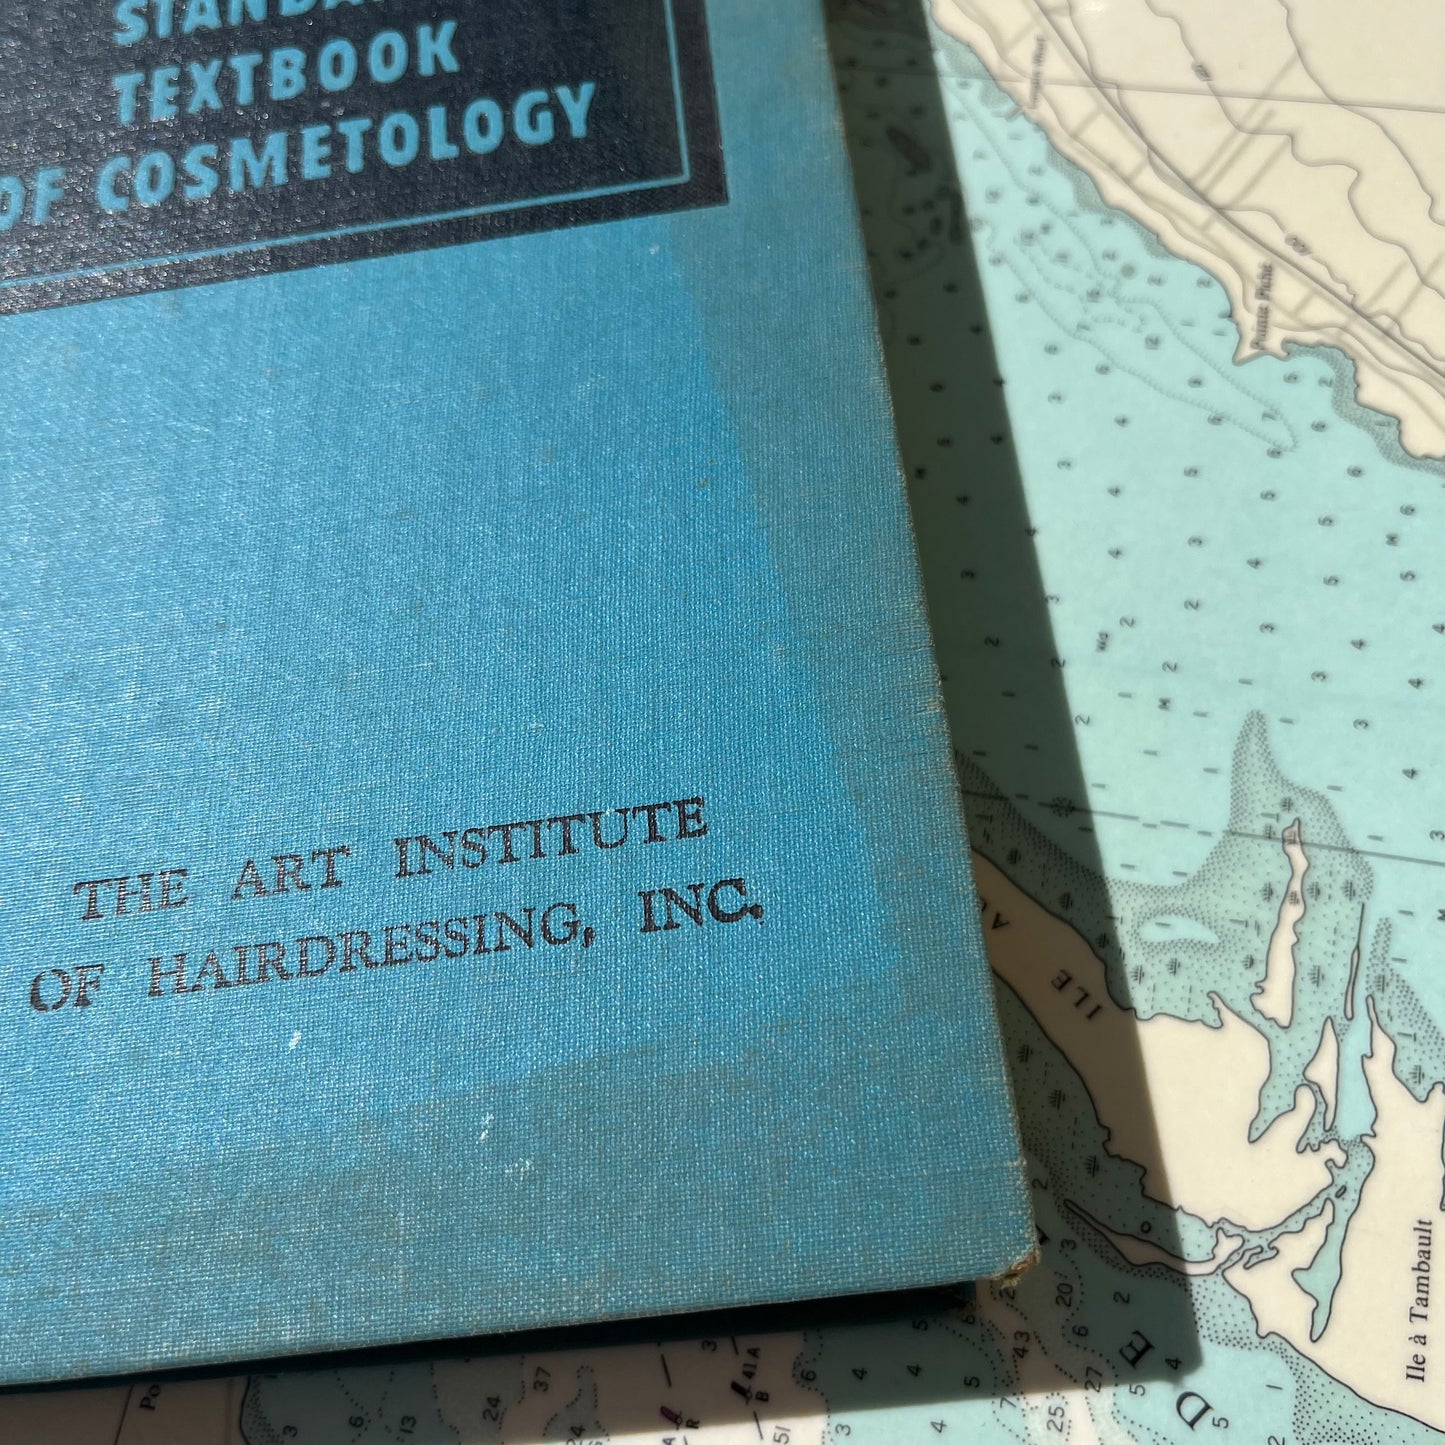 Vintage 1963 Standard Textbook of Cosmetology